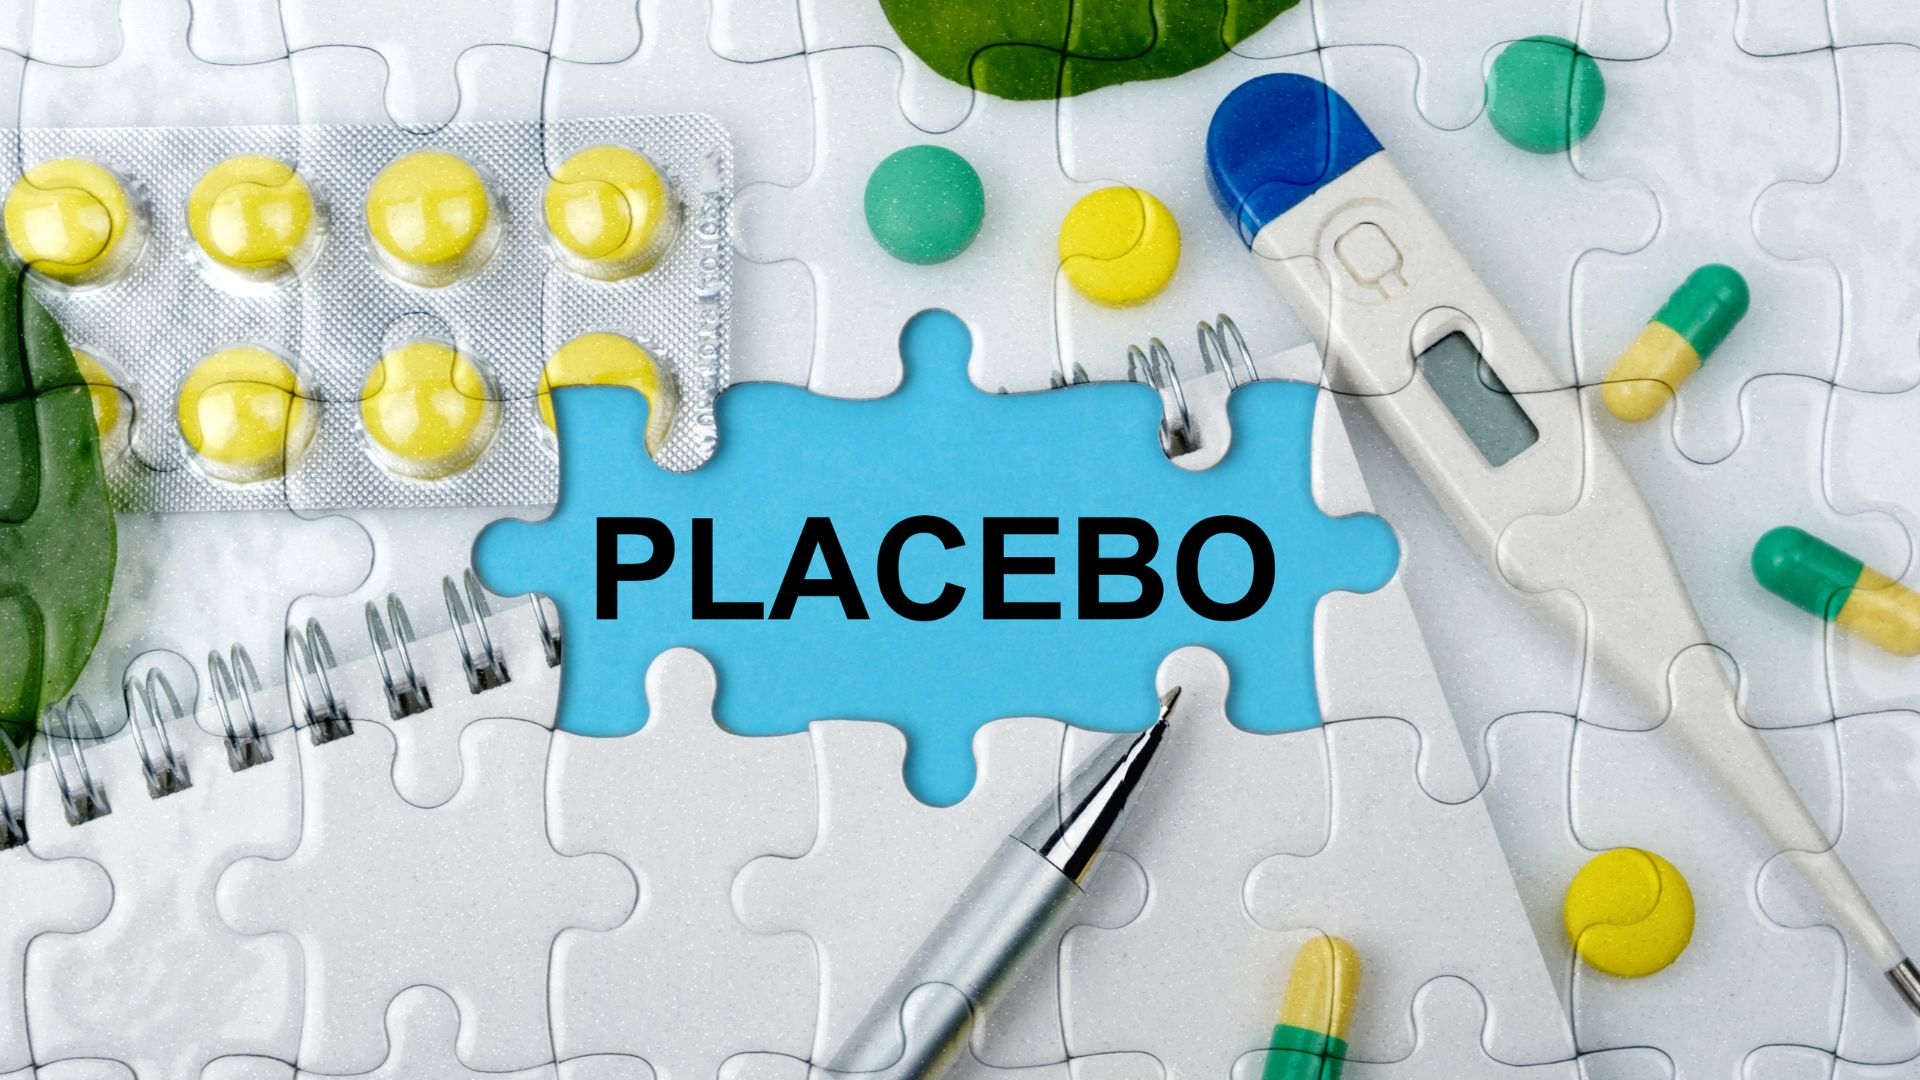 can you relieve your tinnitus whit a placebo?